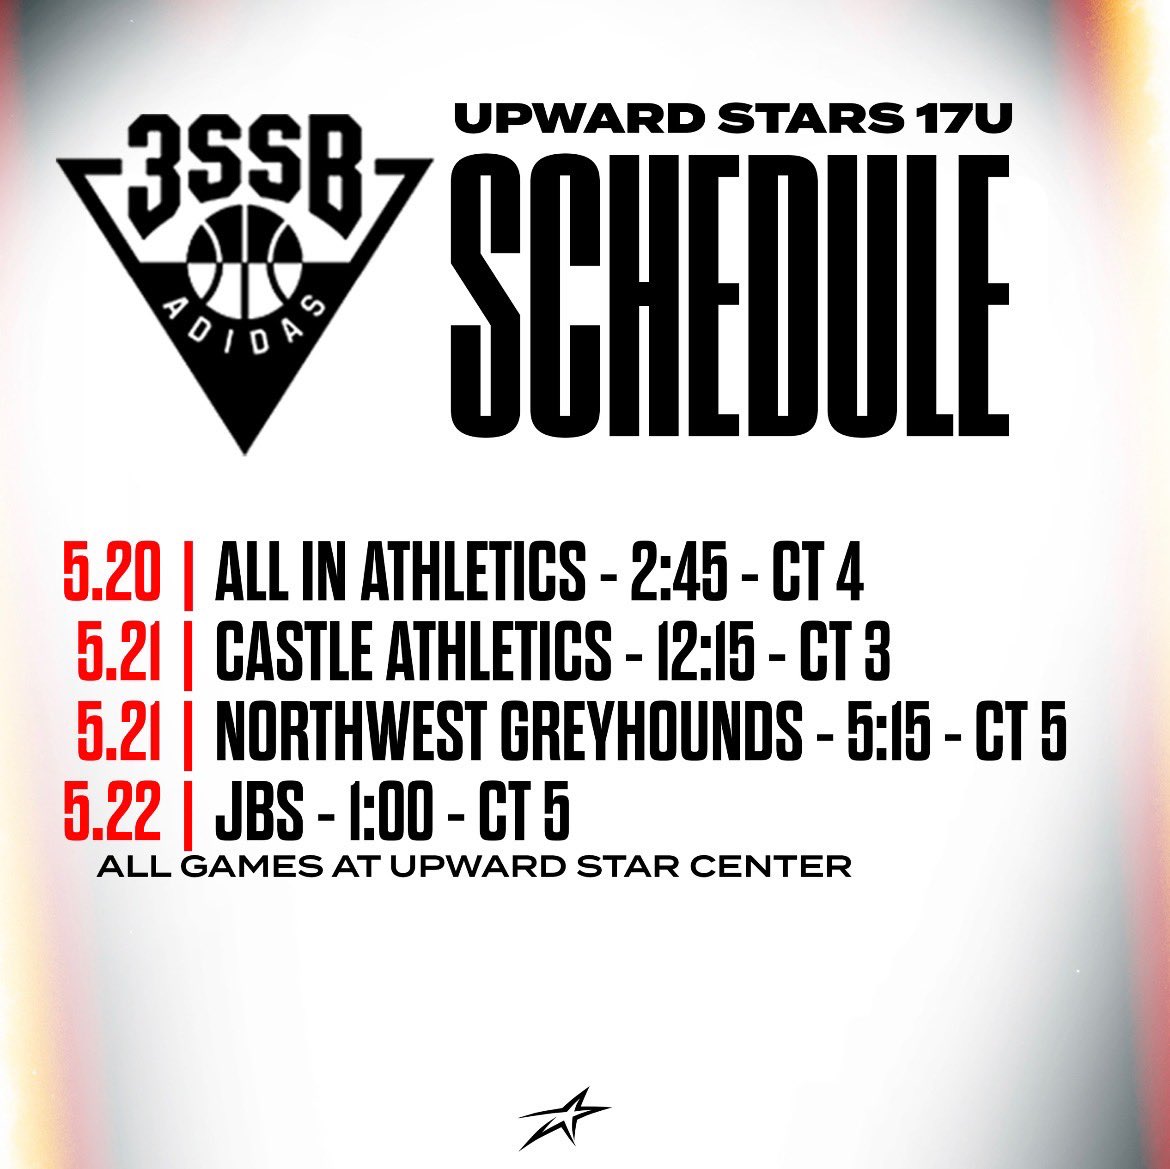 Coaches, check us out this weekend @ Girls @adidas3SSB with @UStarsse 17U in Spartanburg, SC.